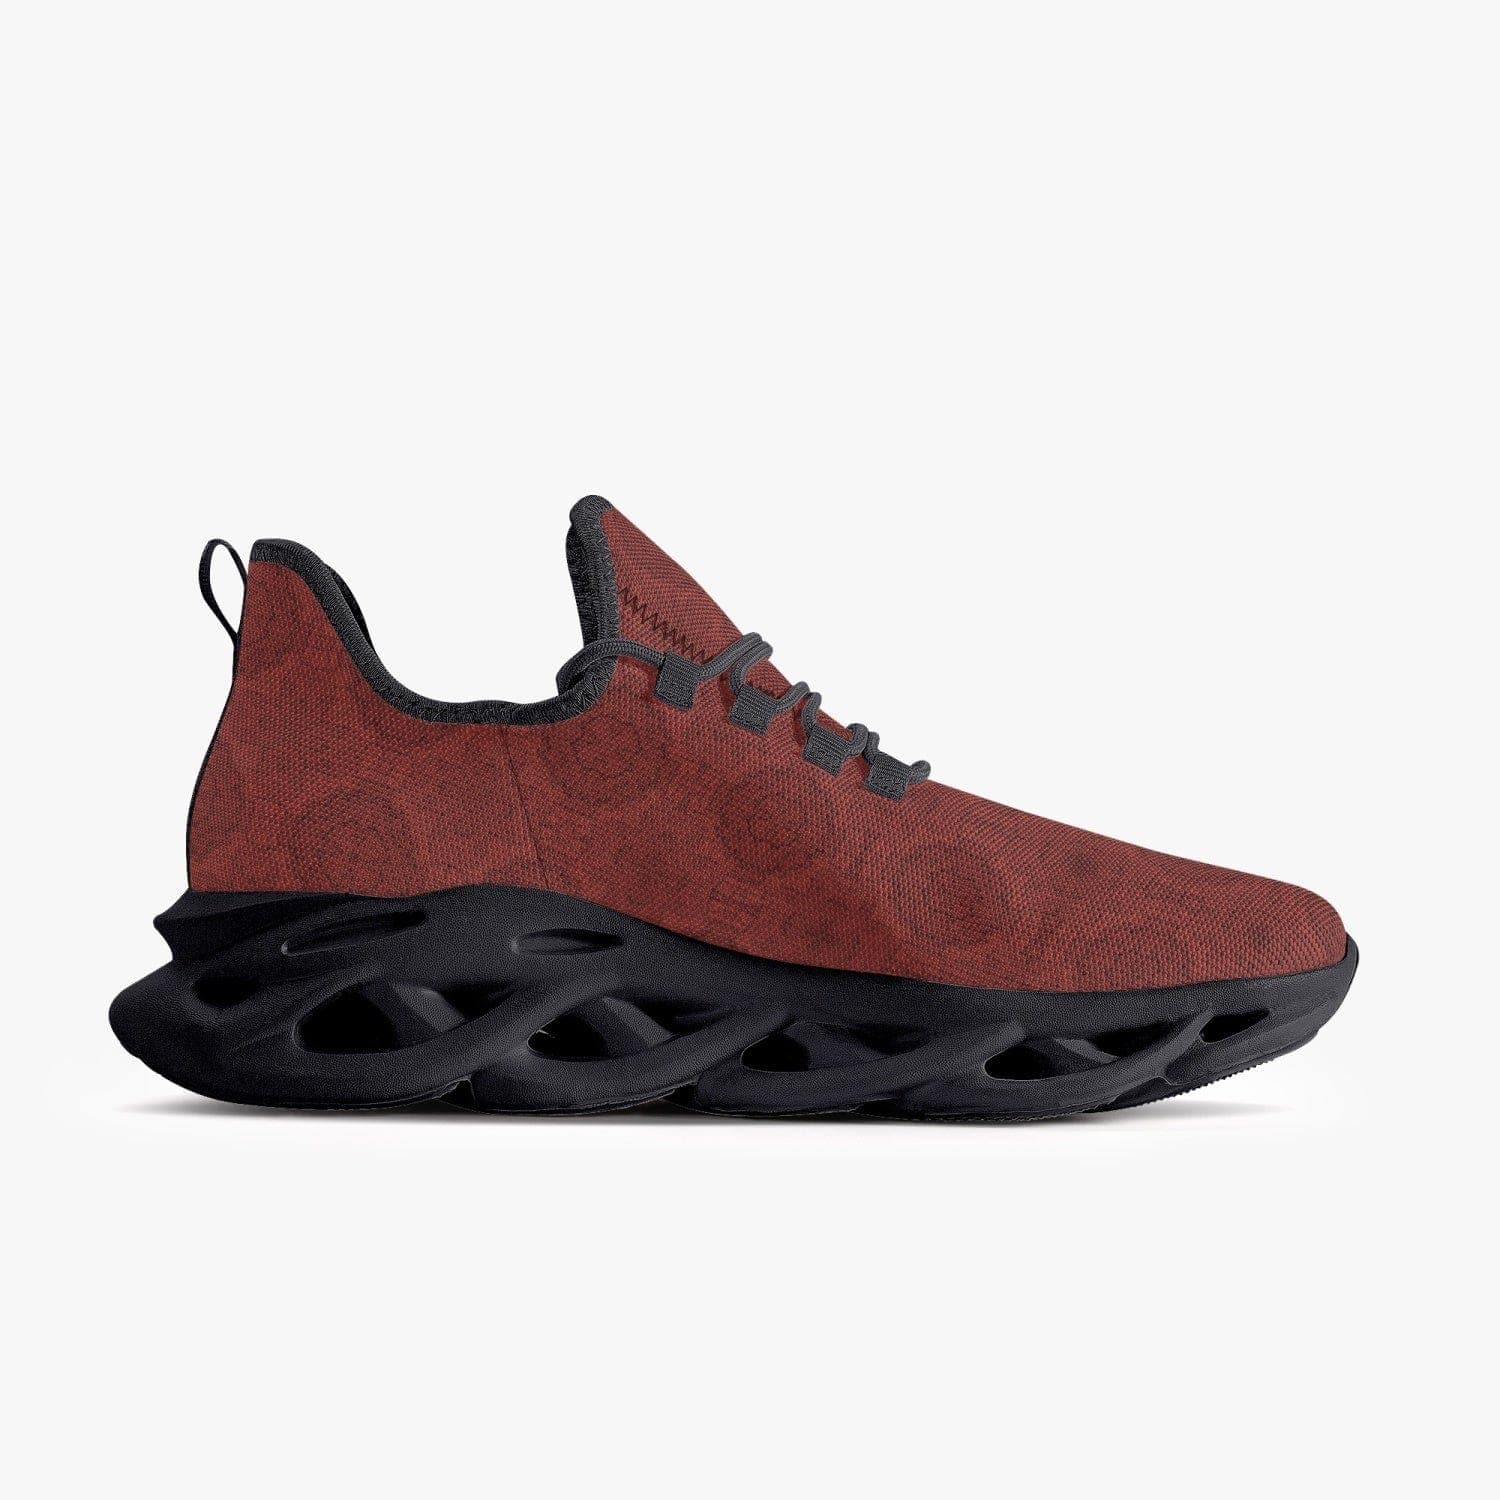 Red Durable Responsive Bounce Laced Mesh Soft Knit Sneakers for Men and Women with Arch Support, designed by Sensus Studio Design